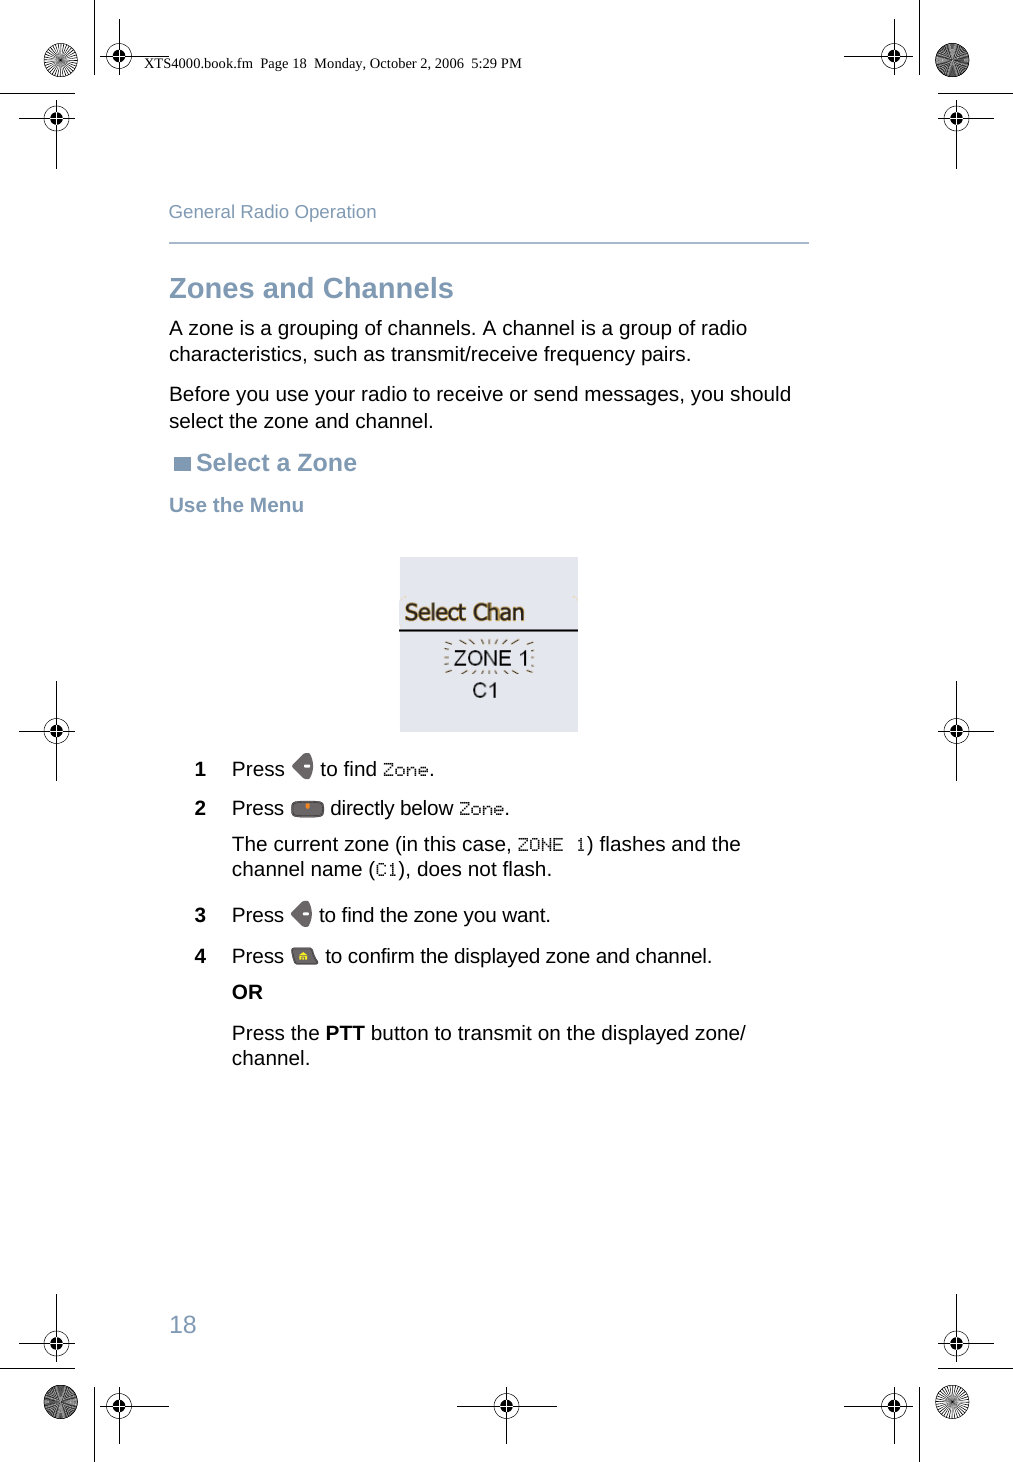 18General Radio OperationZones and ChannelsA zone is a grouping of channels. A channel is a group of radio characteristics, such as transmit/receive frequency pairs. Before you use your radio to receive or send messages, you should select the zone and channel.Select a ZoneUse the Menu 1Press   to find Zone.2Press   directly below Zone.The current zone (in this case, ZONE 1) flashes and the channel name (C1), does not flash.3Press   to find the zone you want. 4Press   to confirm the displayed zone and channel. ORPress the PTT button to transmit on the displayed zone/channel.XTS4000.book.fm  Page 18  Monday, October 2, 2006  5:29 PM